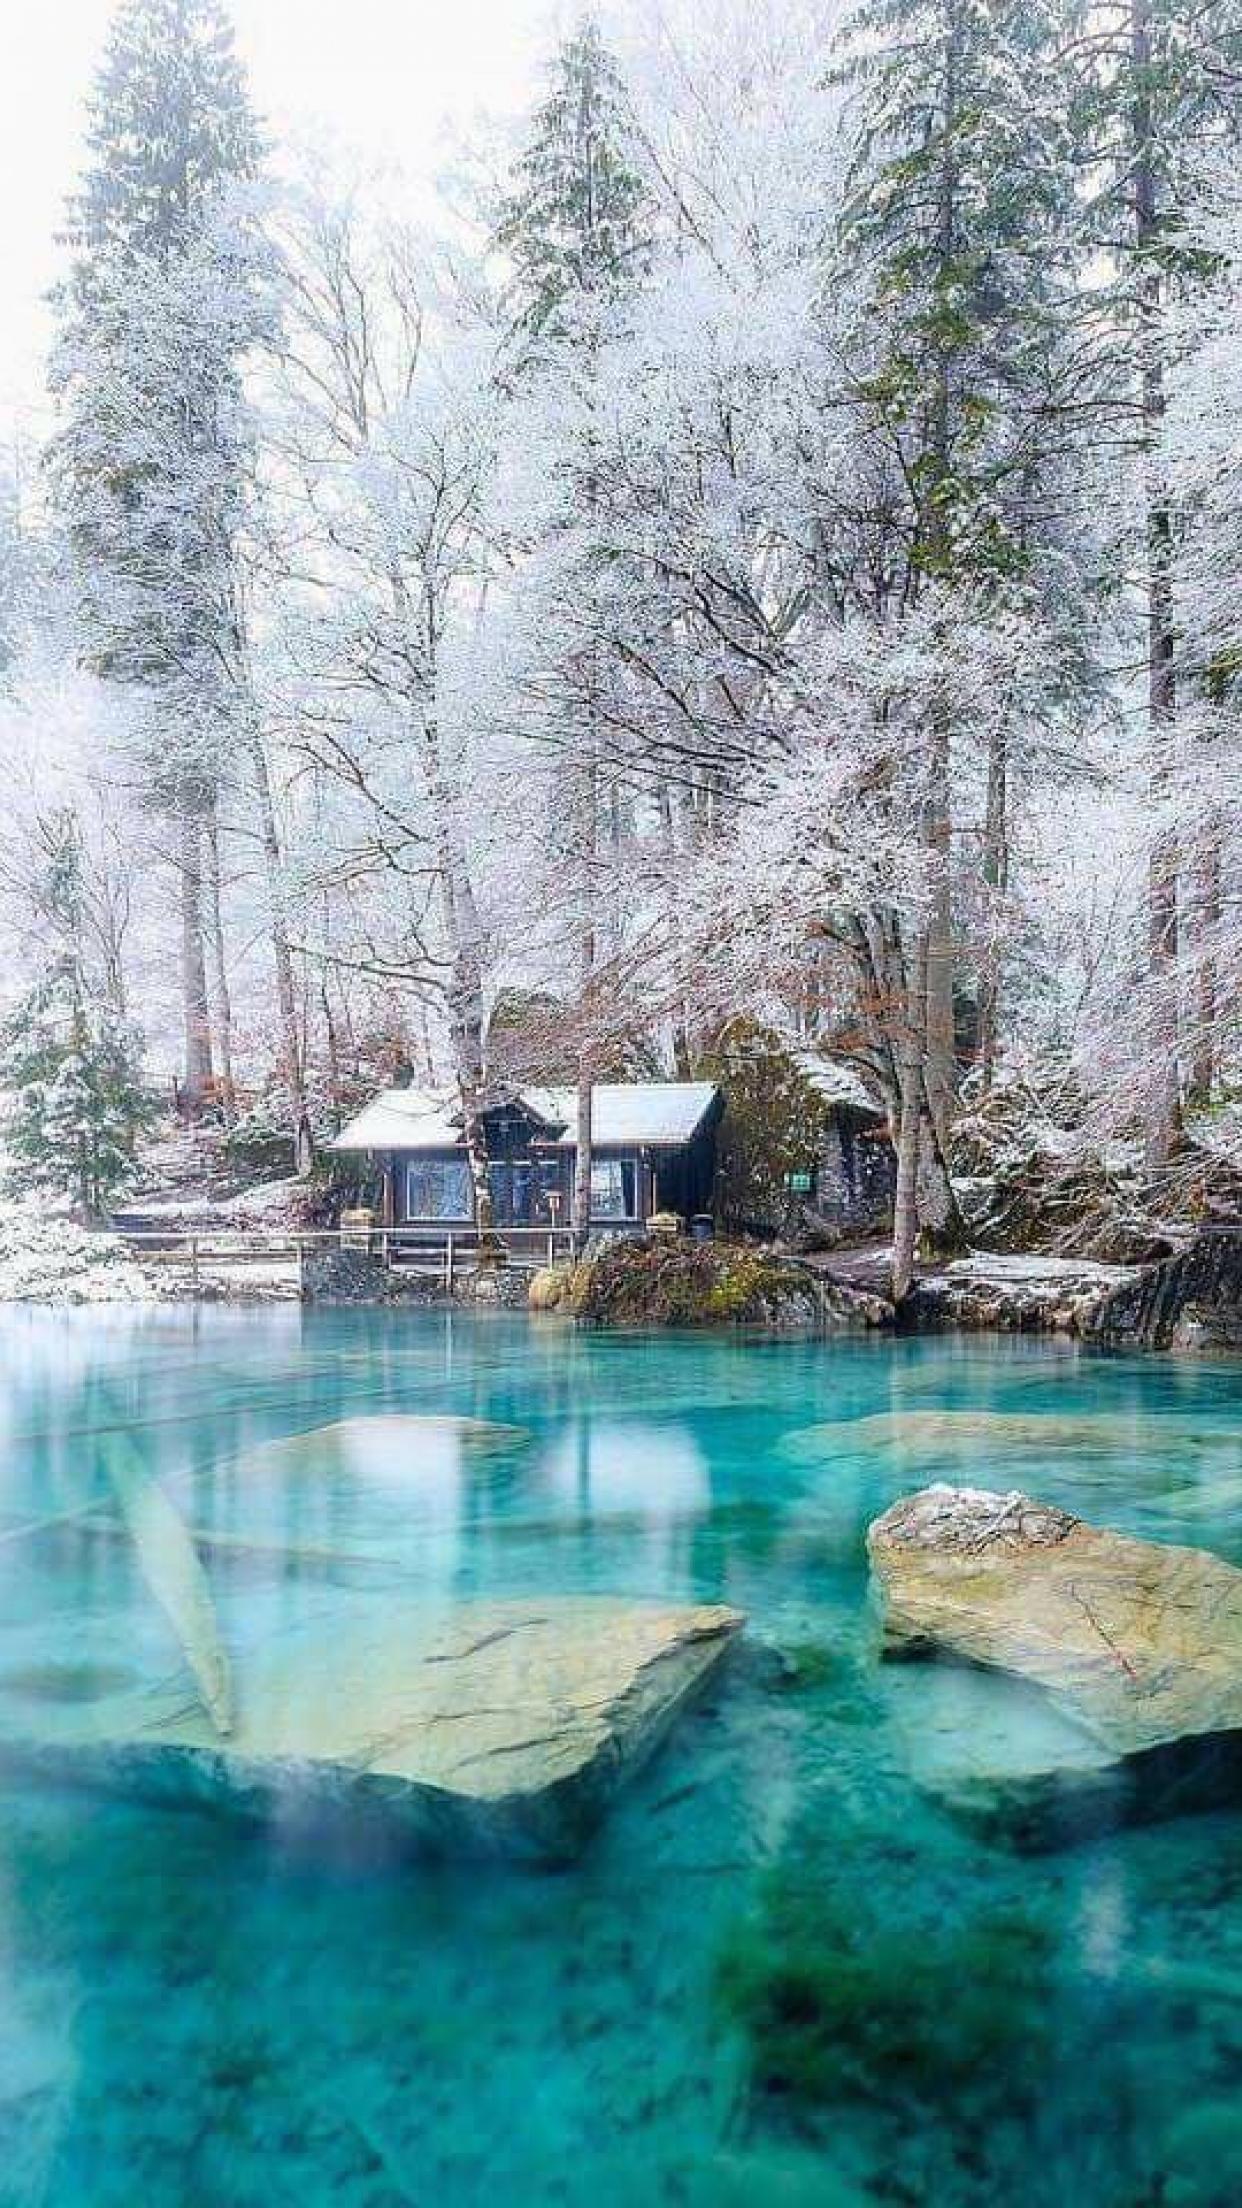 Loving the white and blue colours of Lake Blausee during winter